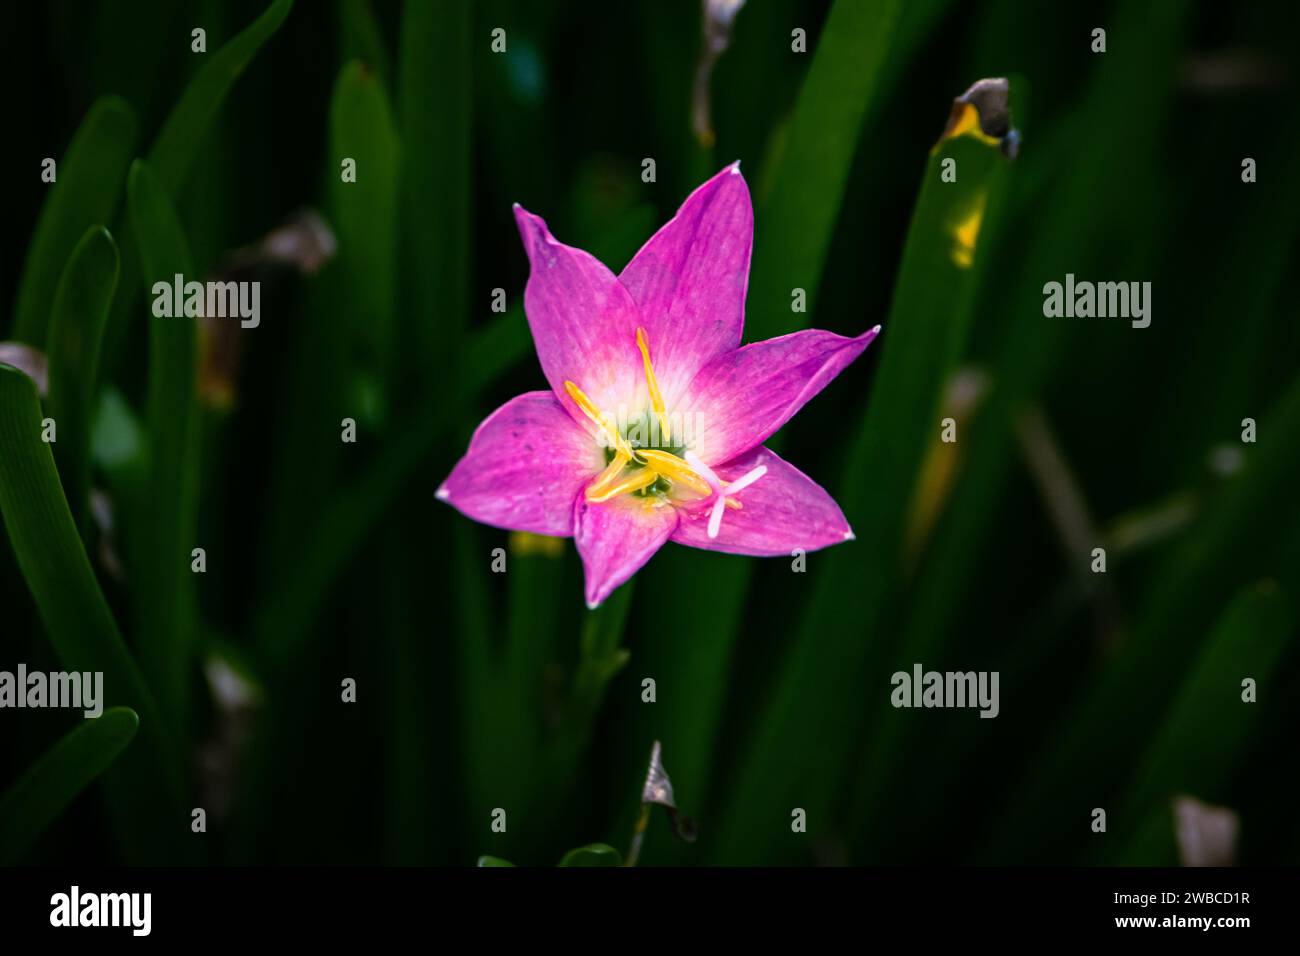 Purple Rosy Rain Lily Flower in Contrast With The Background Stock Photo